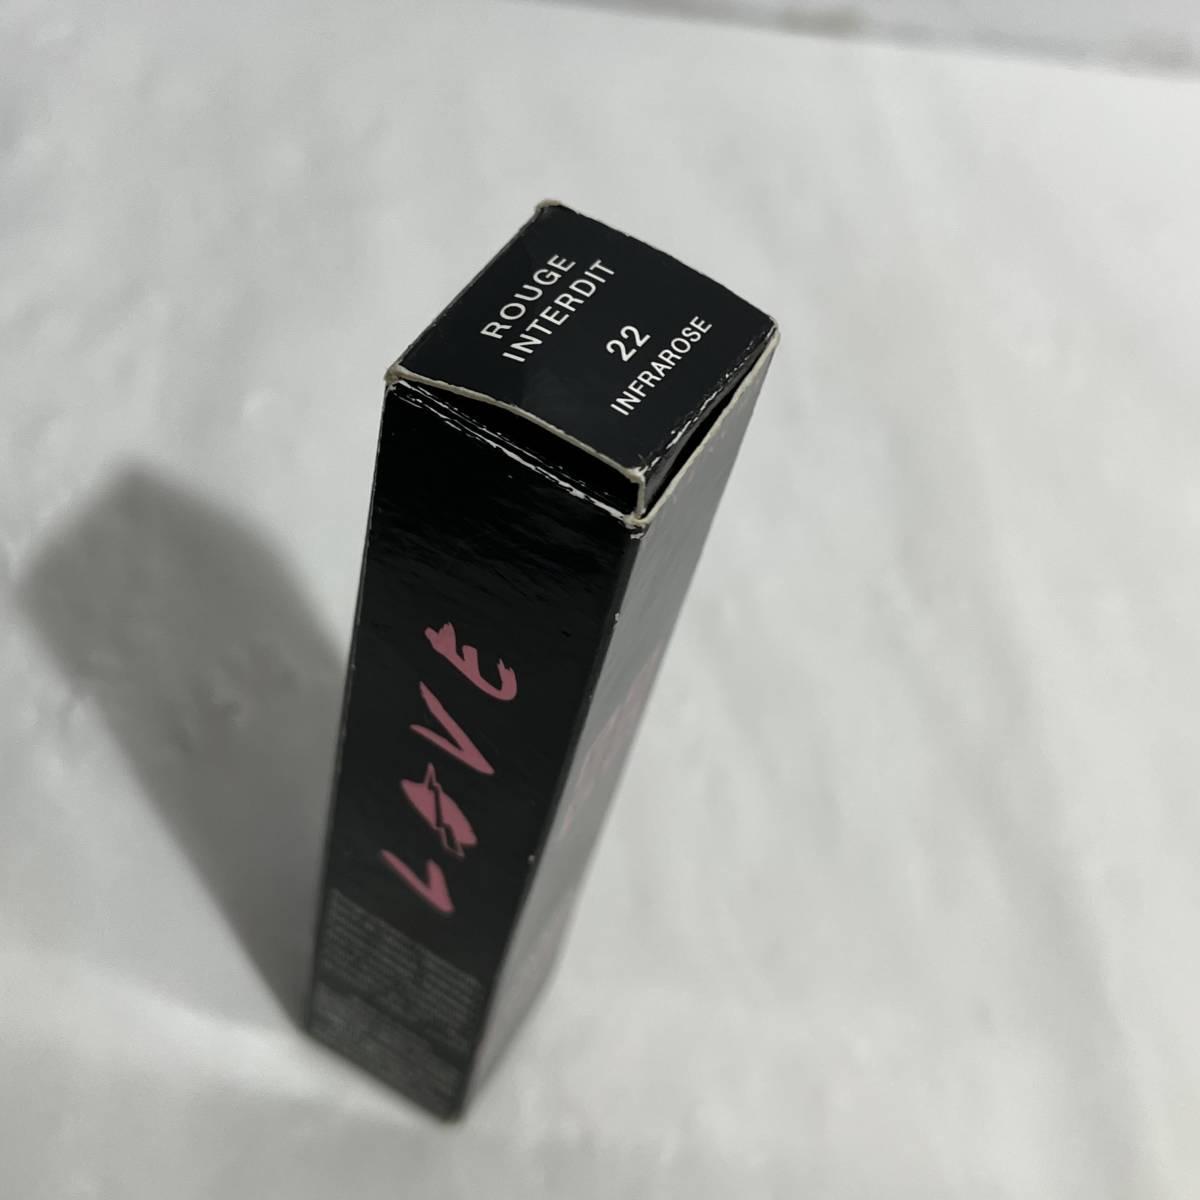 (. tree ) unused *GIVENCHY/ Givenchy rouge Anne te Rudy #22 INFRAROSE lipstick 3.4g cosme cosmetics 